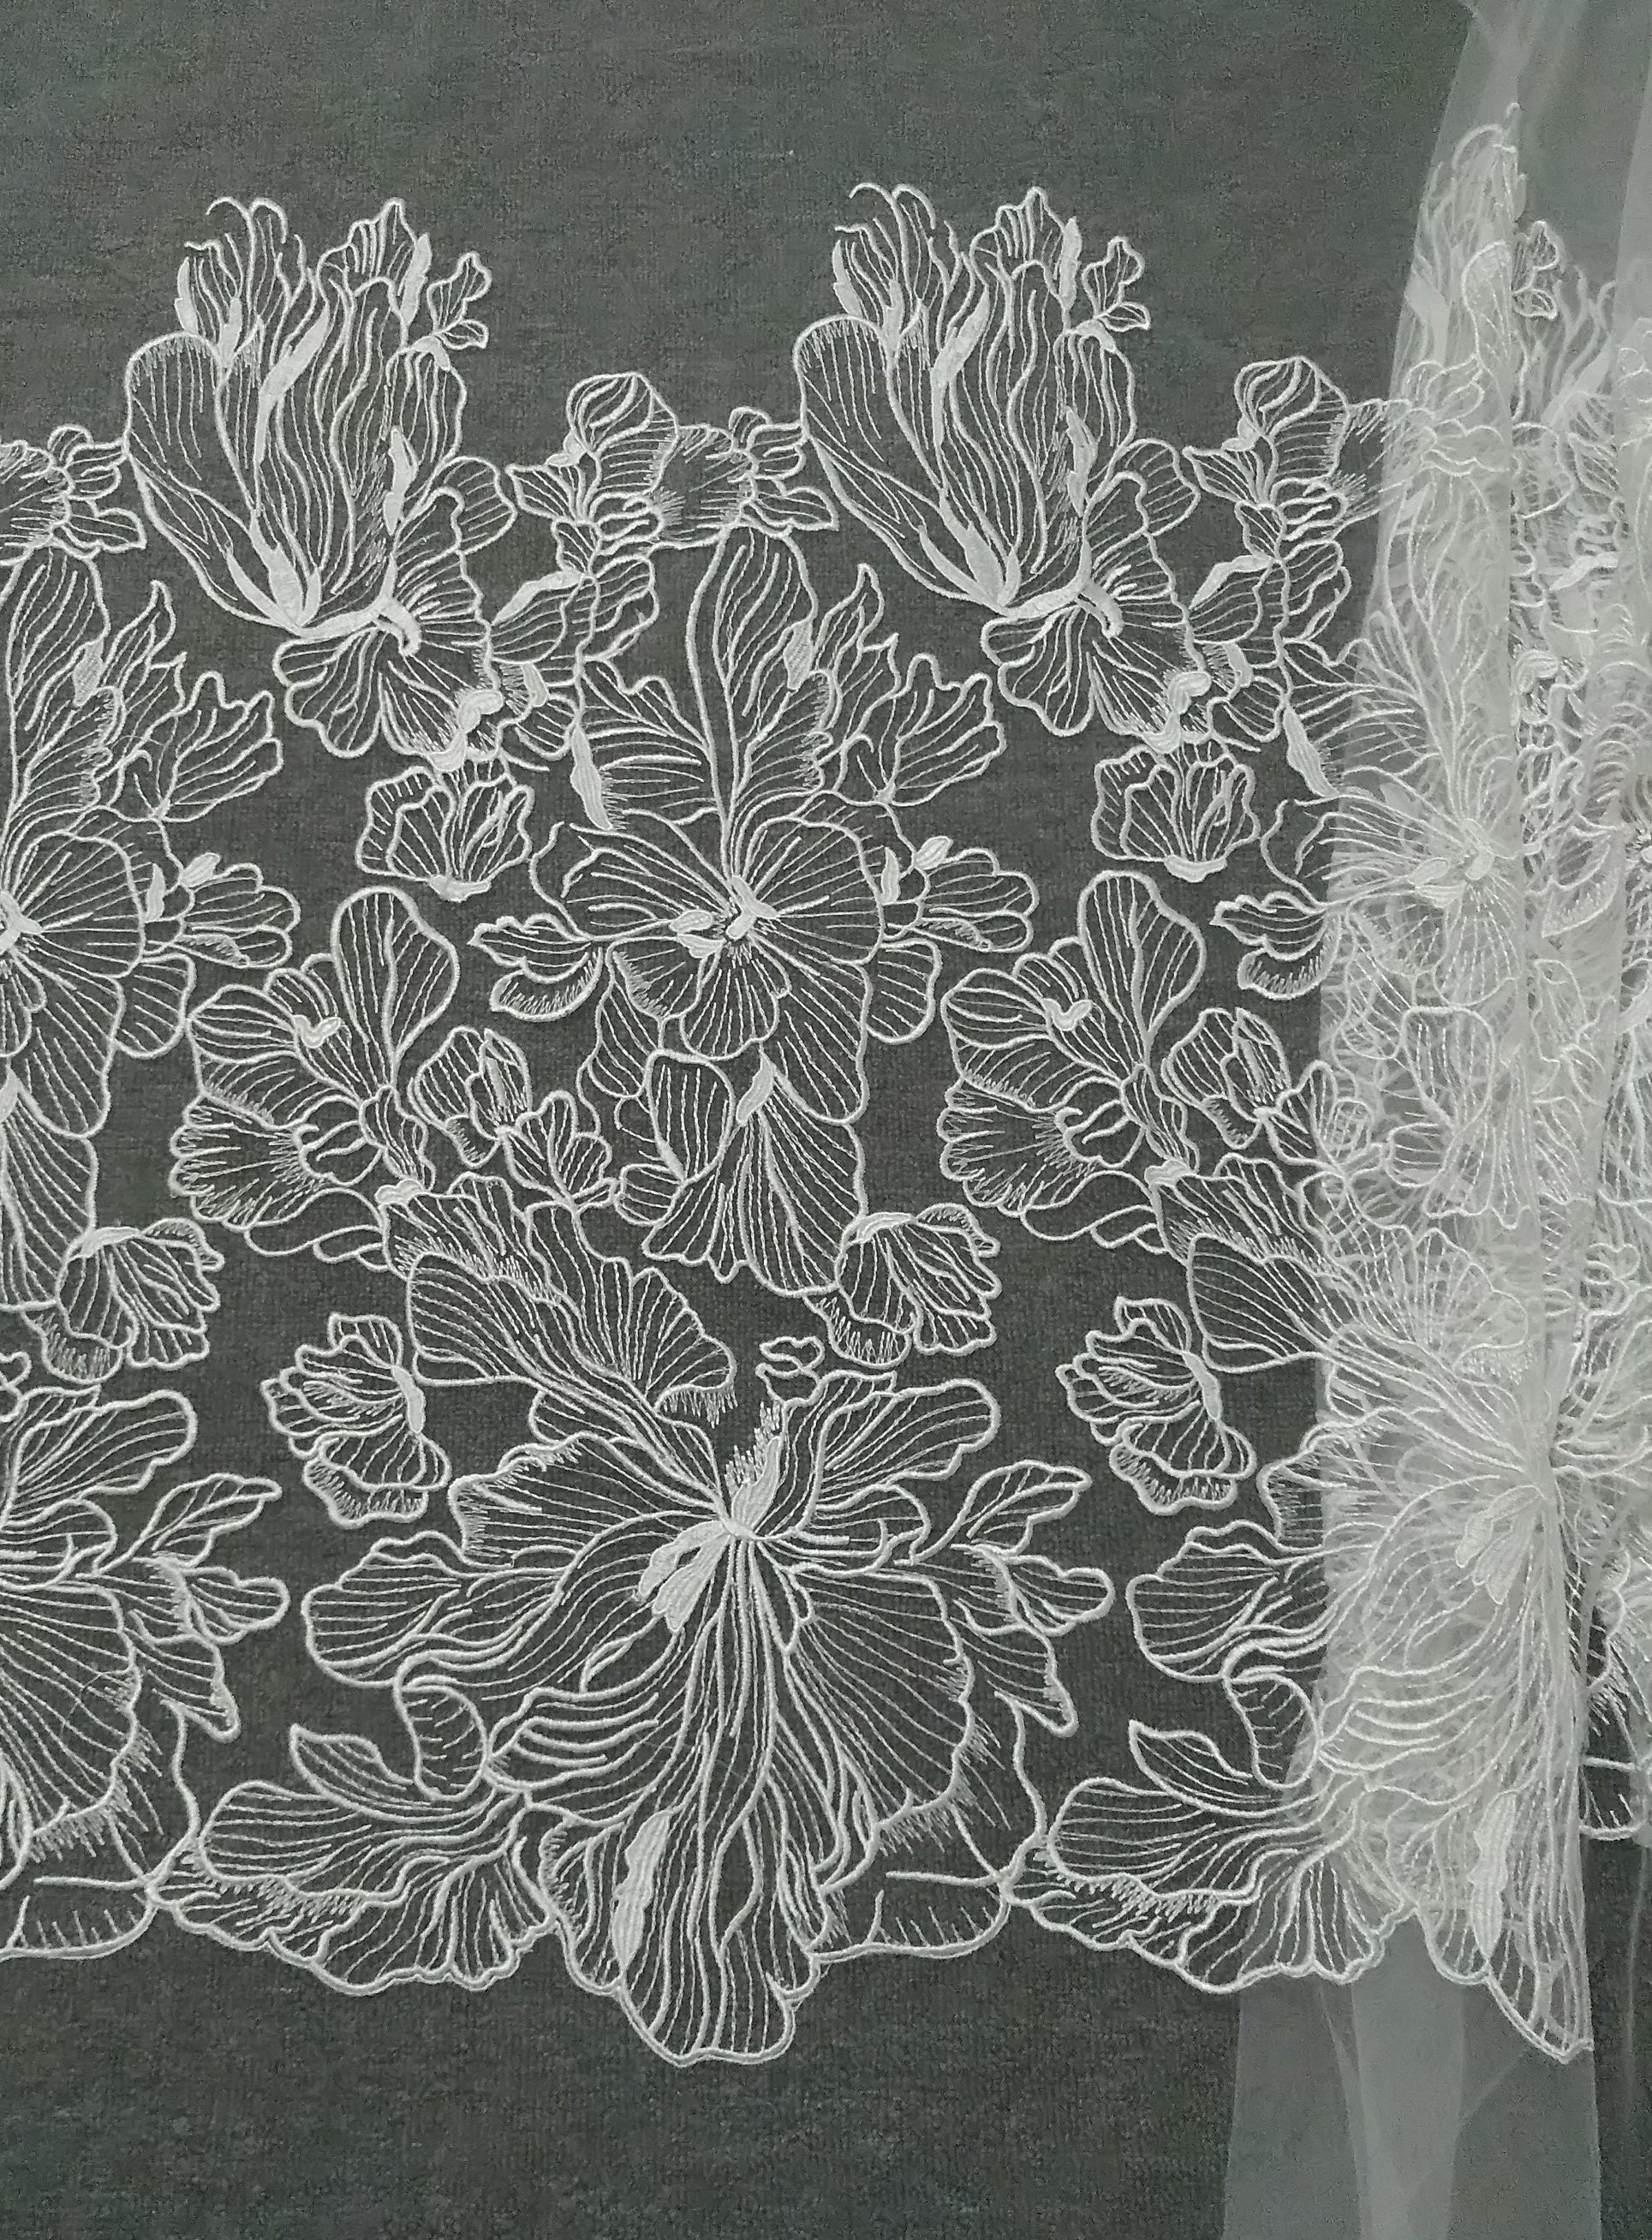 Angel Garden Floral Embroidery Tulle Mesh Lace / Fabric by the